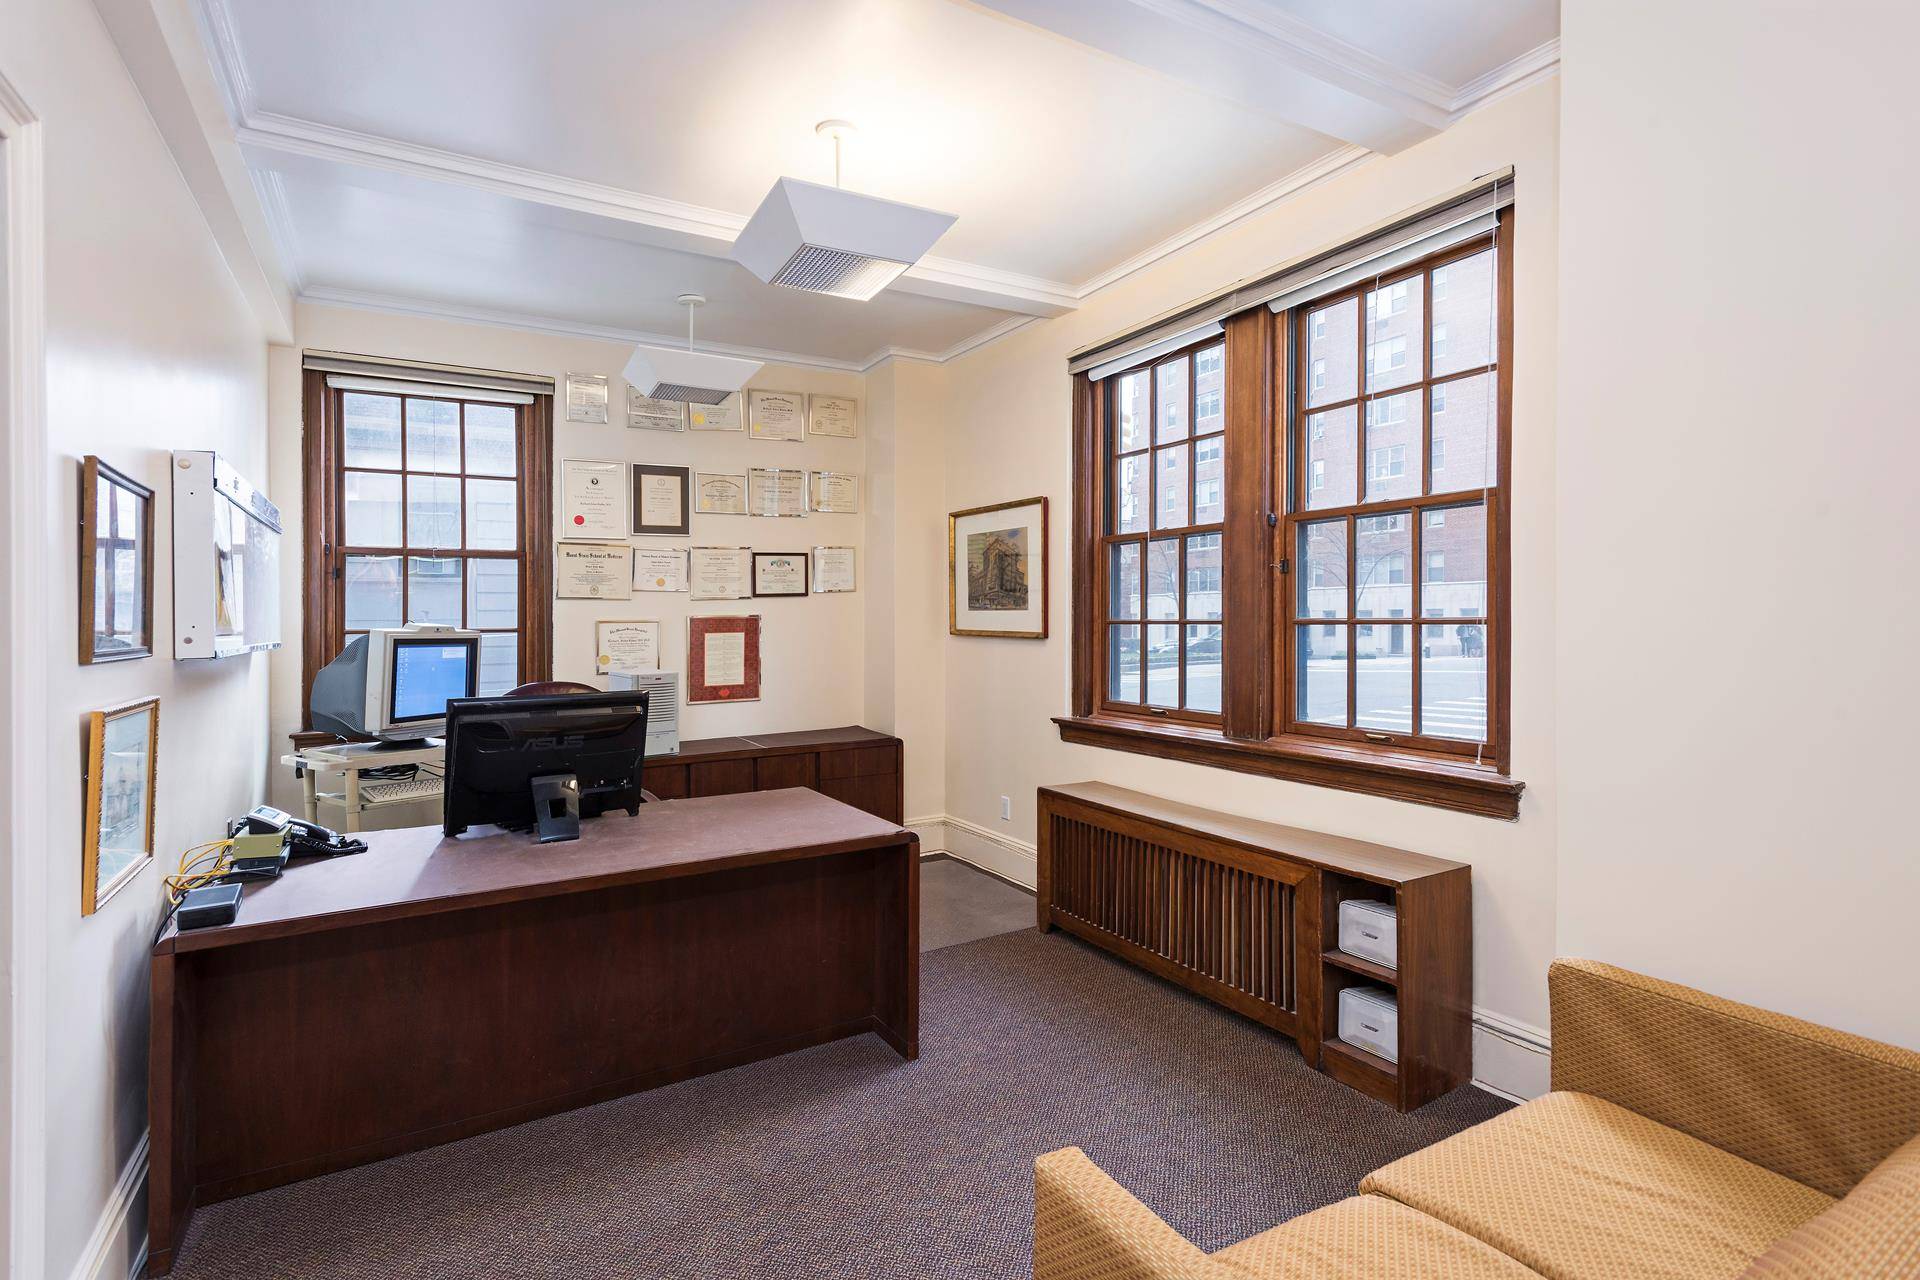 Enter this prestigious medical office in a prominent pre war building through its stately private entrance on Park Avenue.